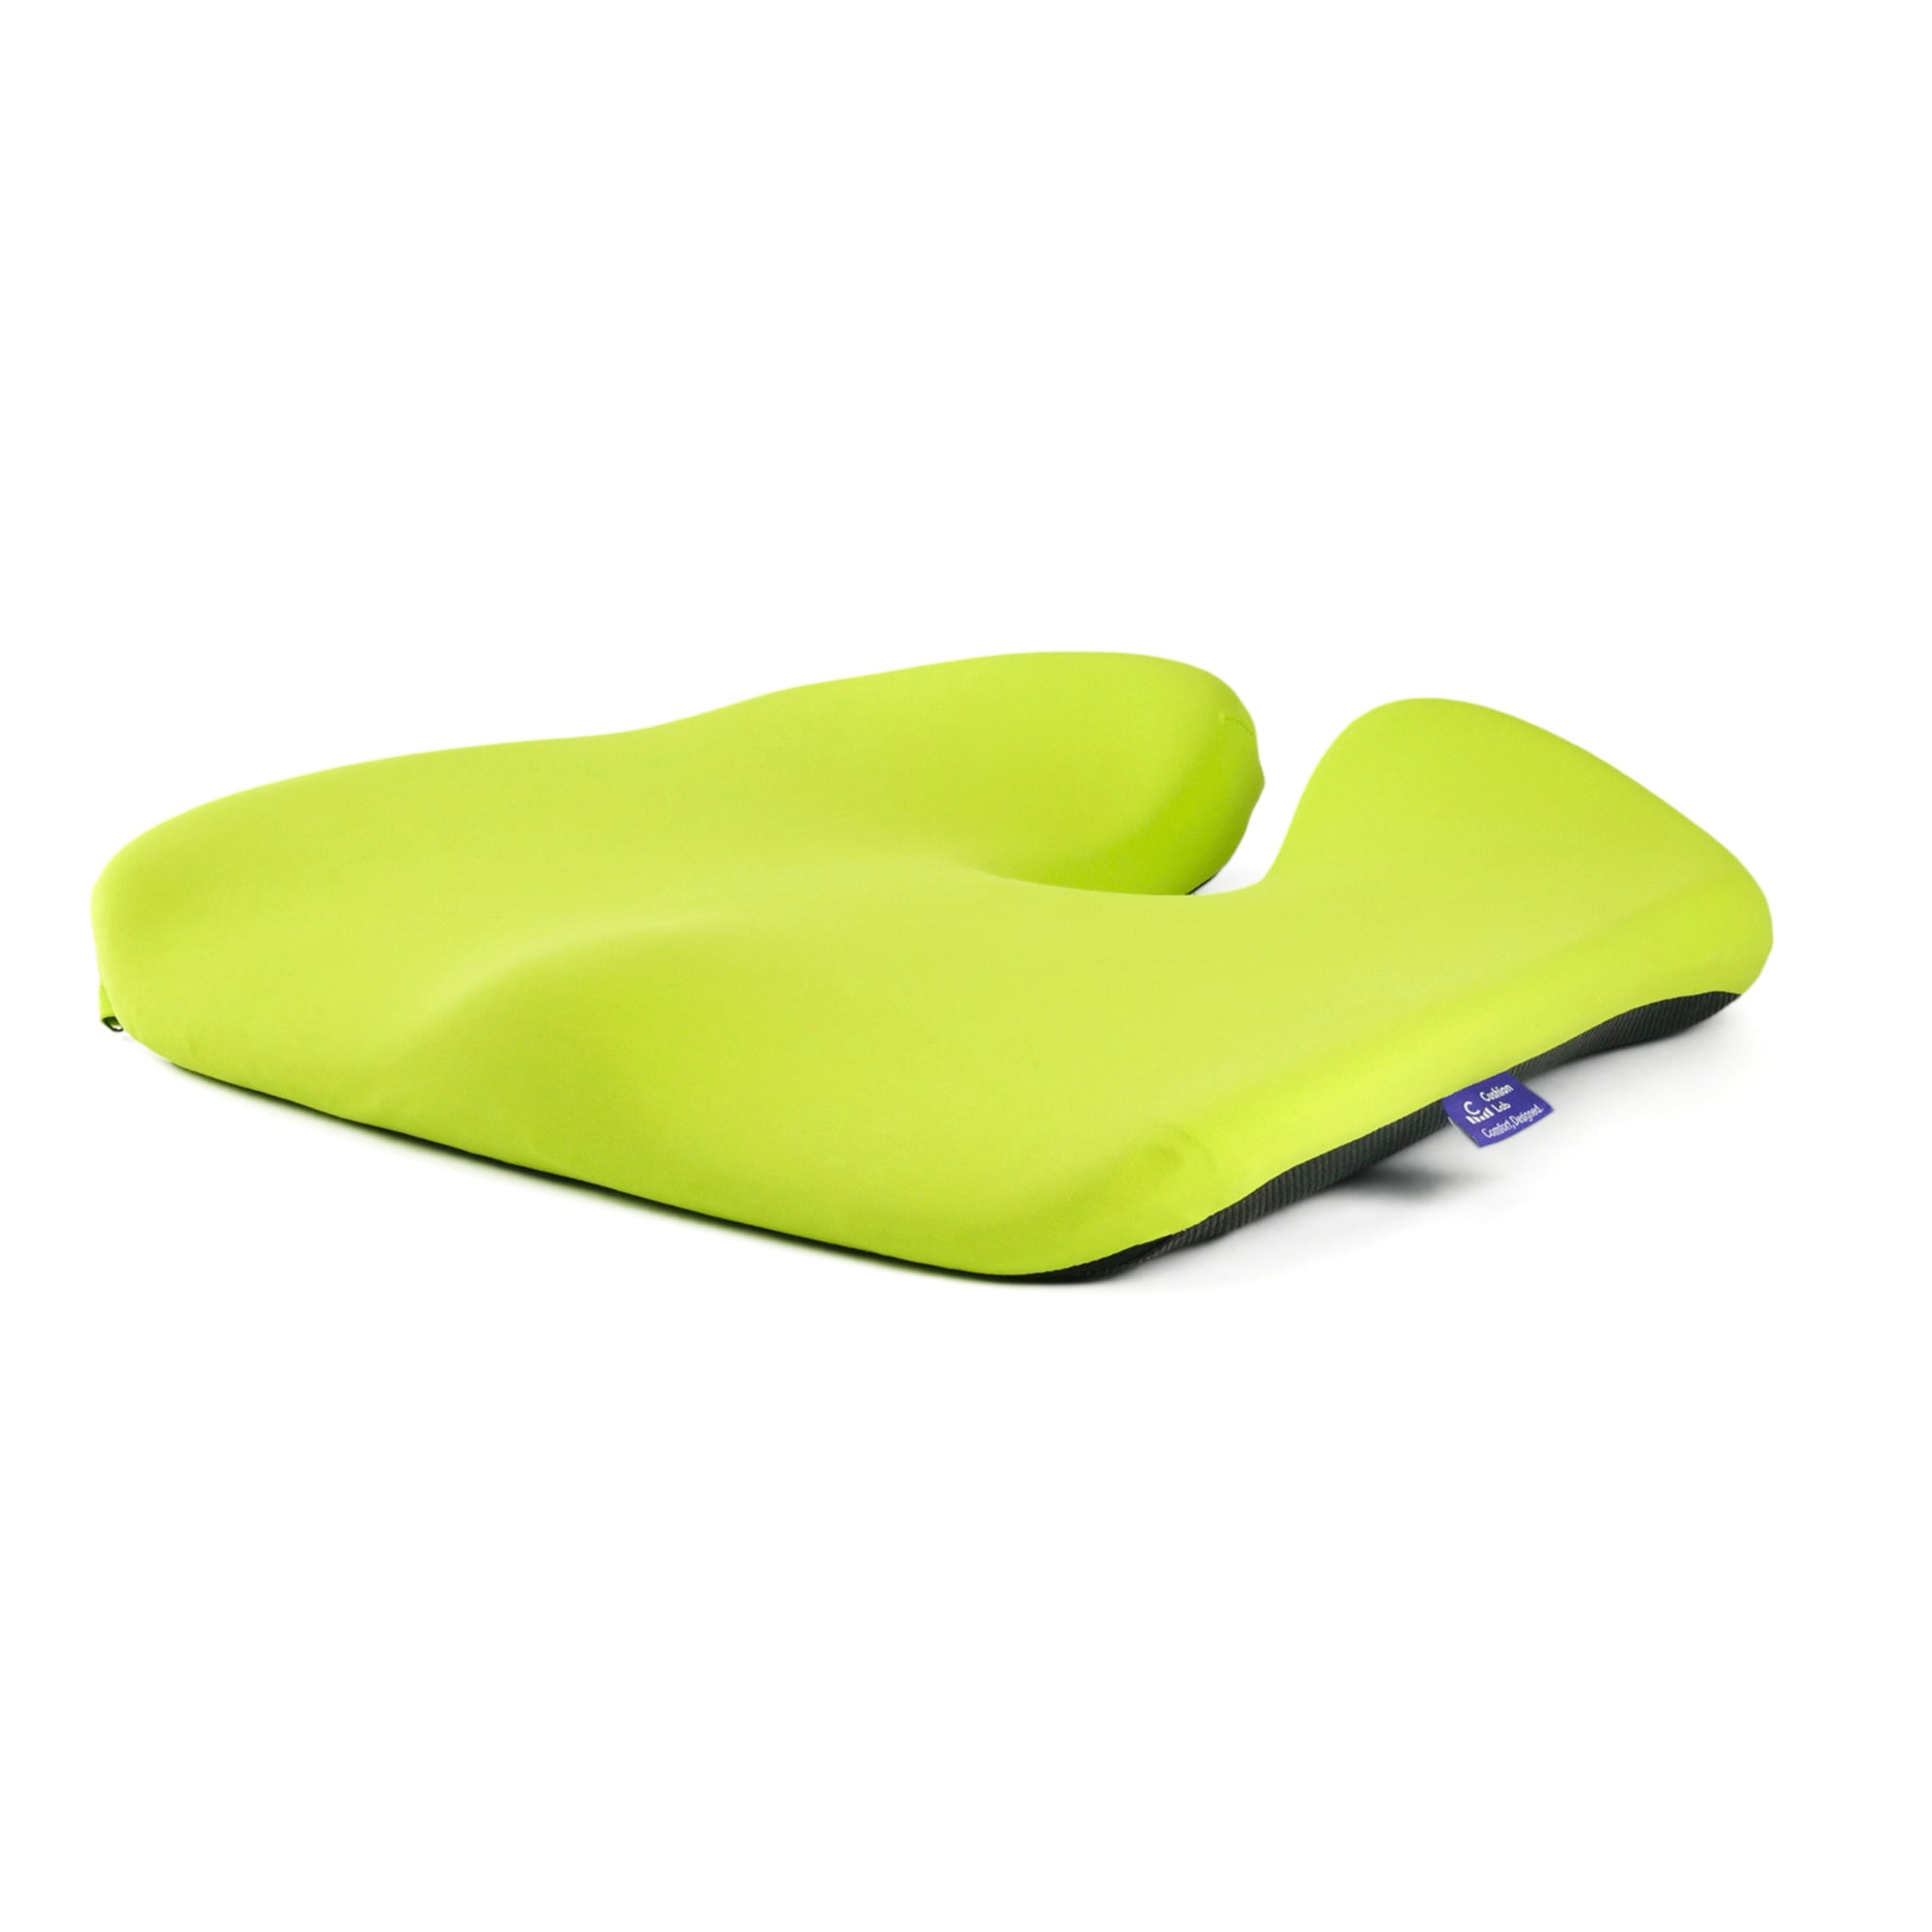 The Best Picks for an Inflatable Seat Cushion for Back Pain